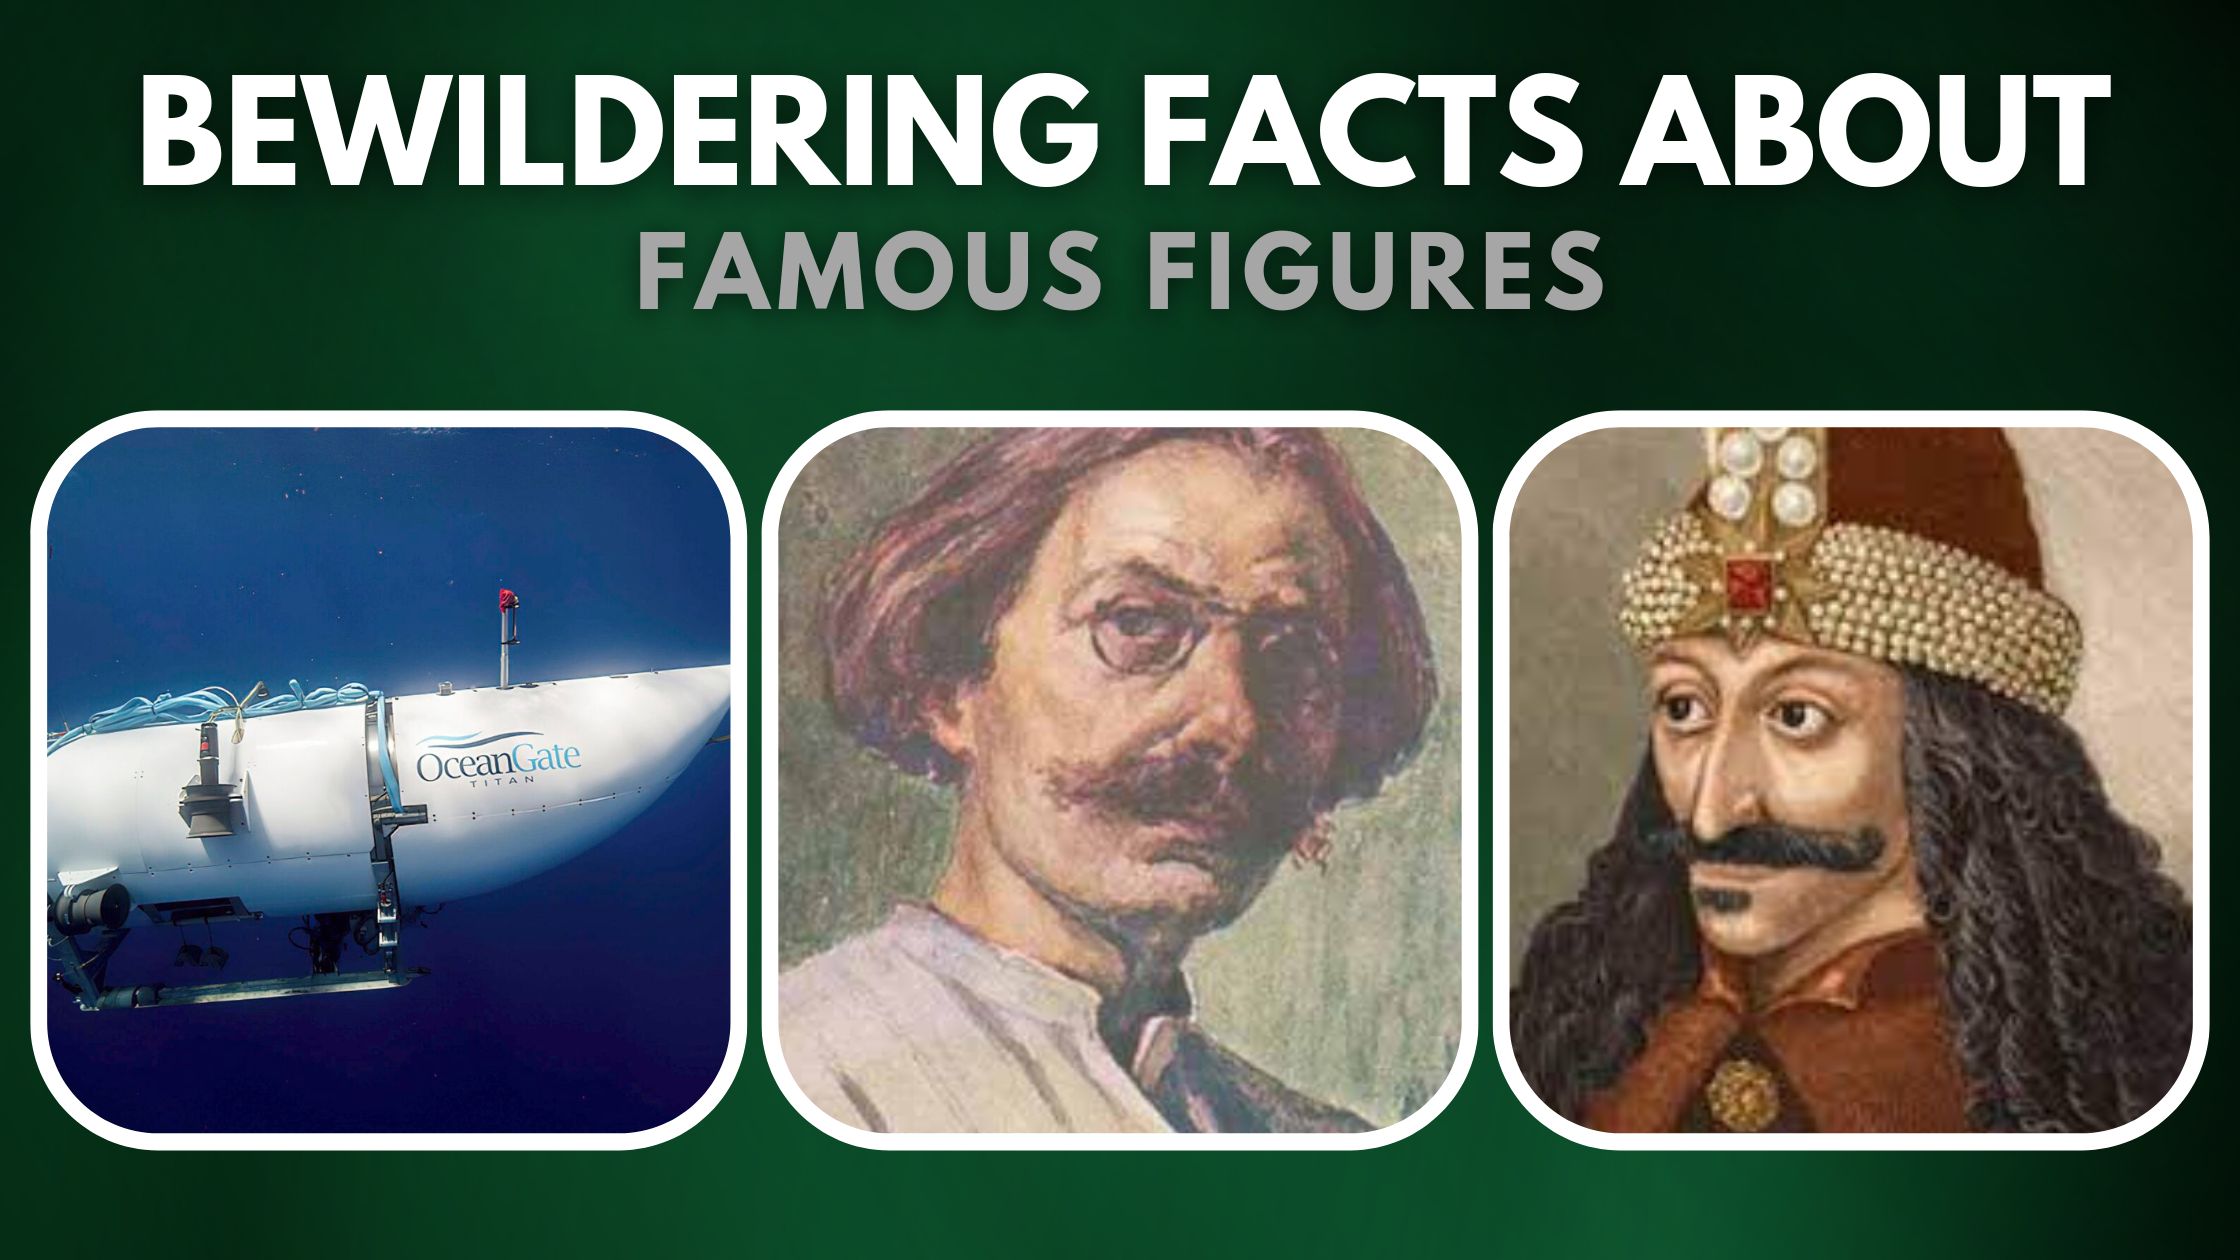 Bewildering Facts About Famous Figures